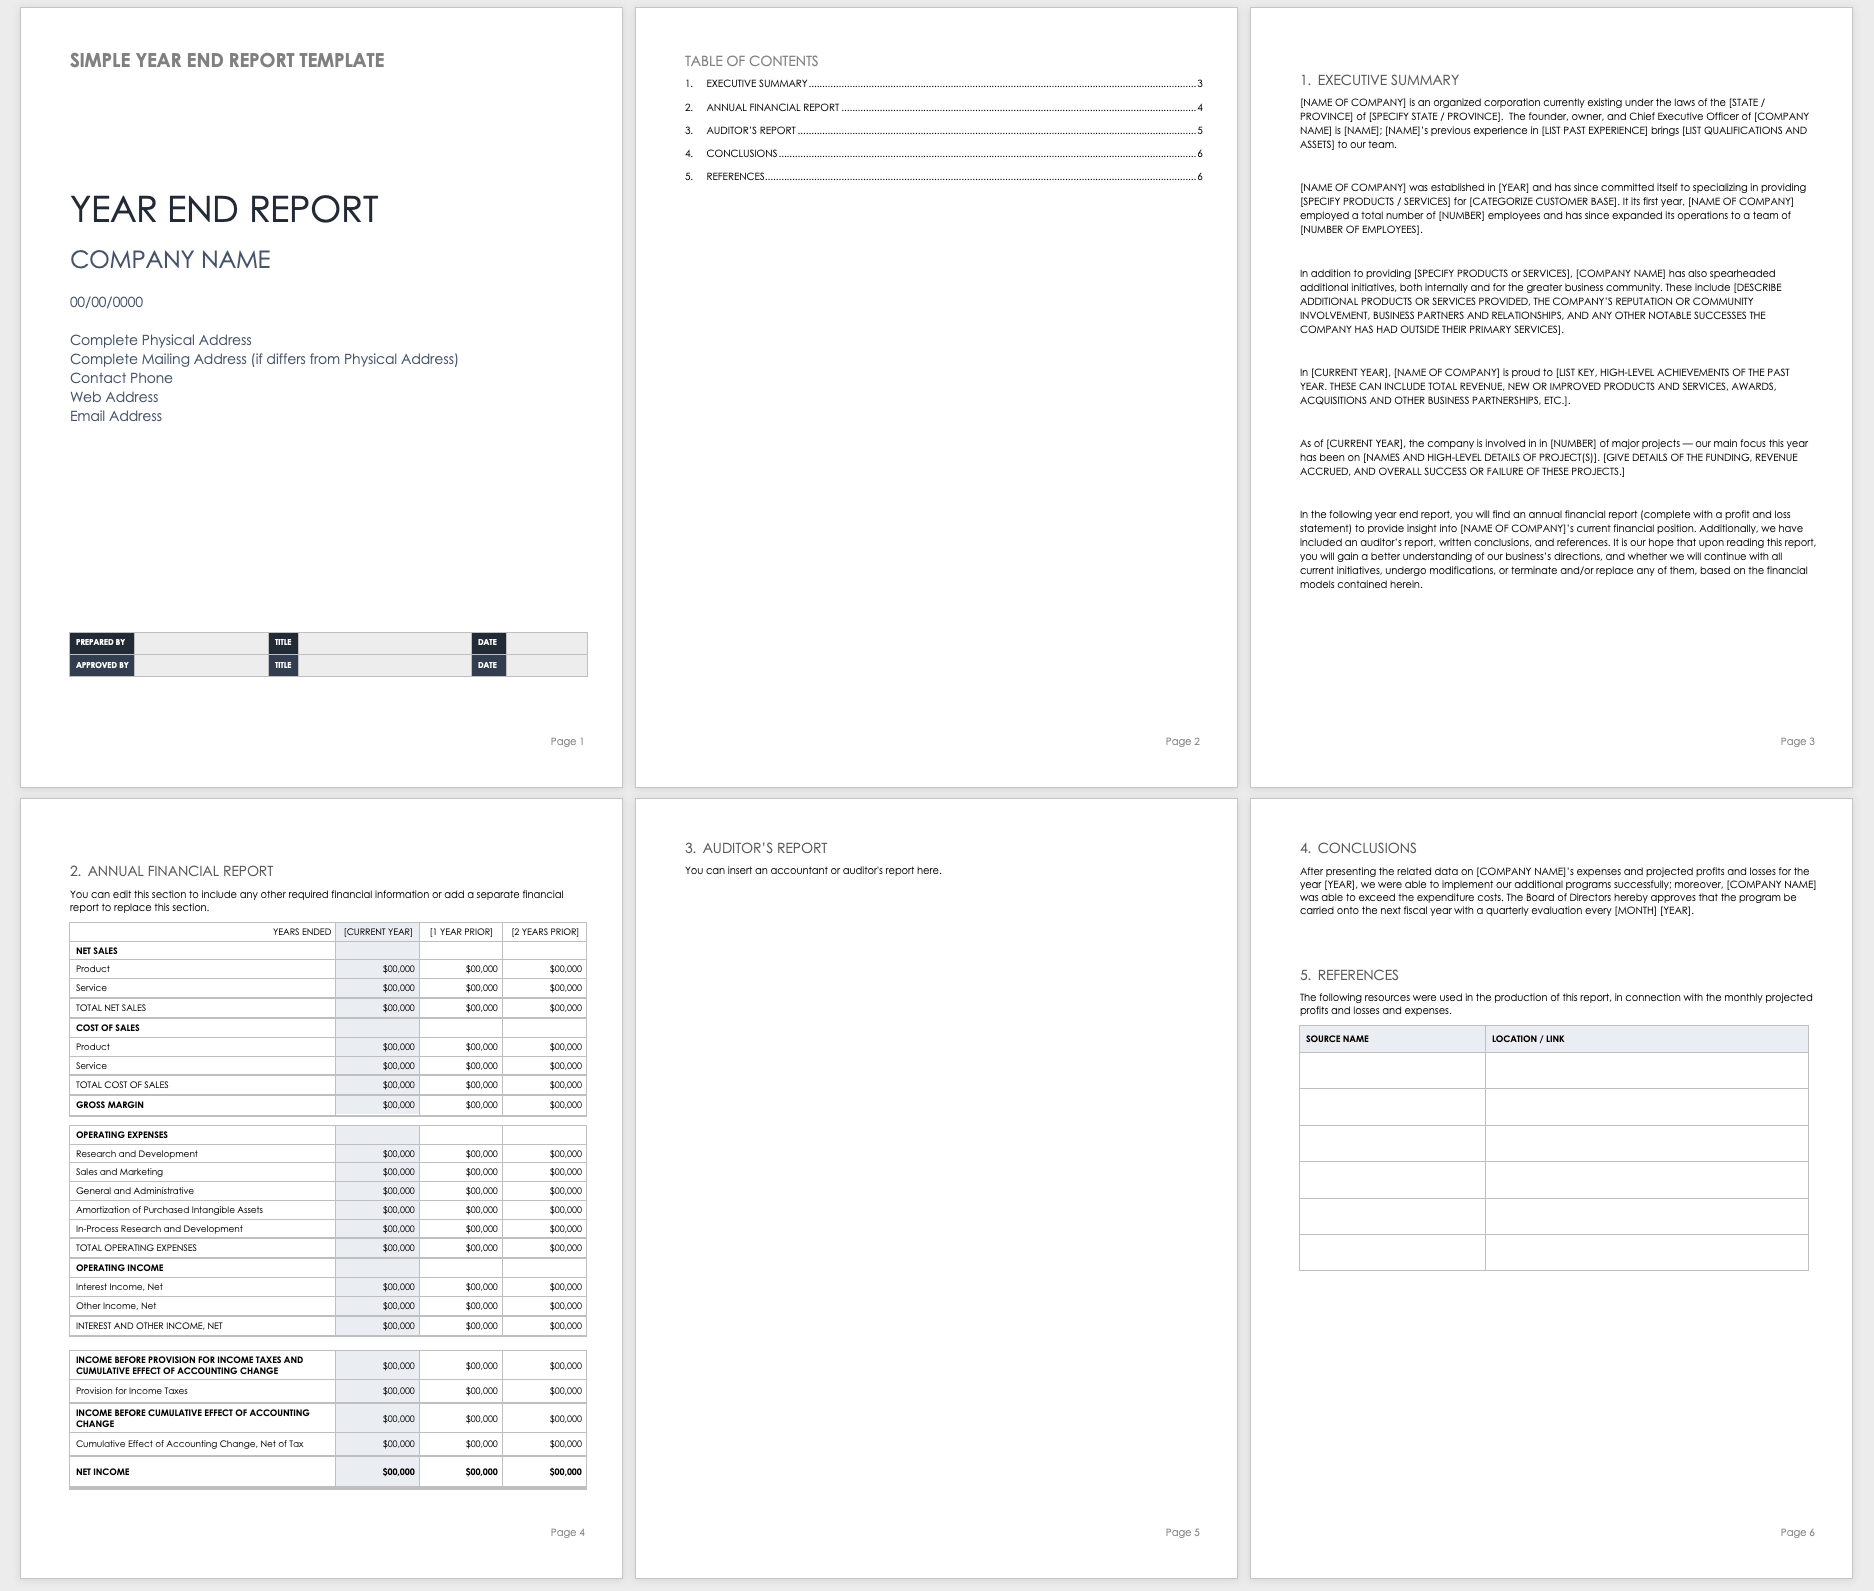 Free Year End Report Templates | Smartsheet Throughout Annual Financial Report Template Word